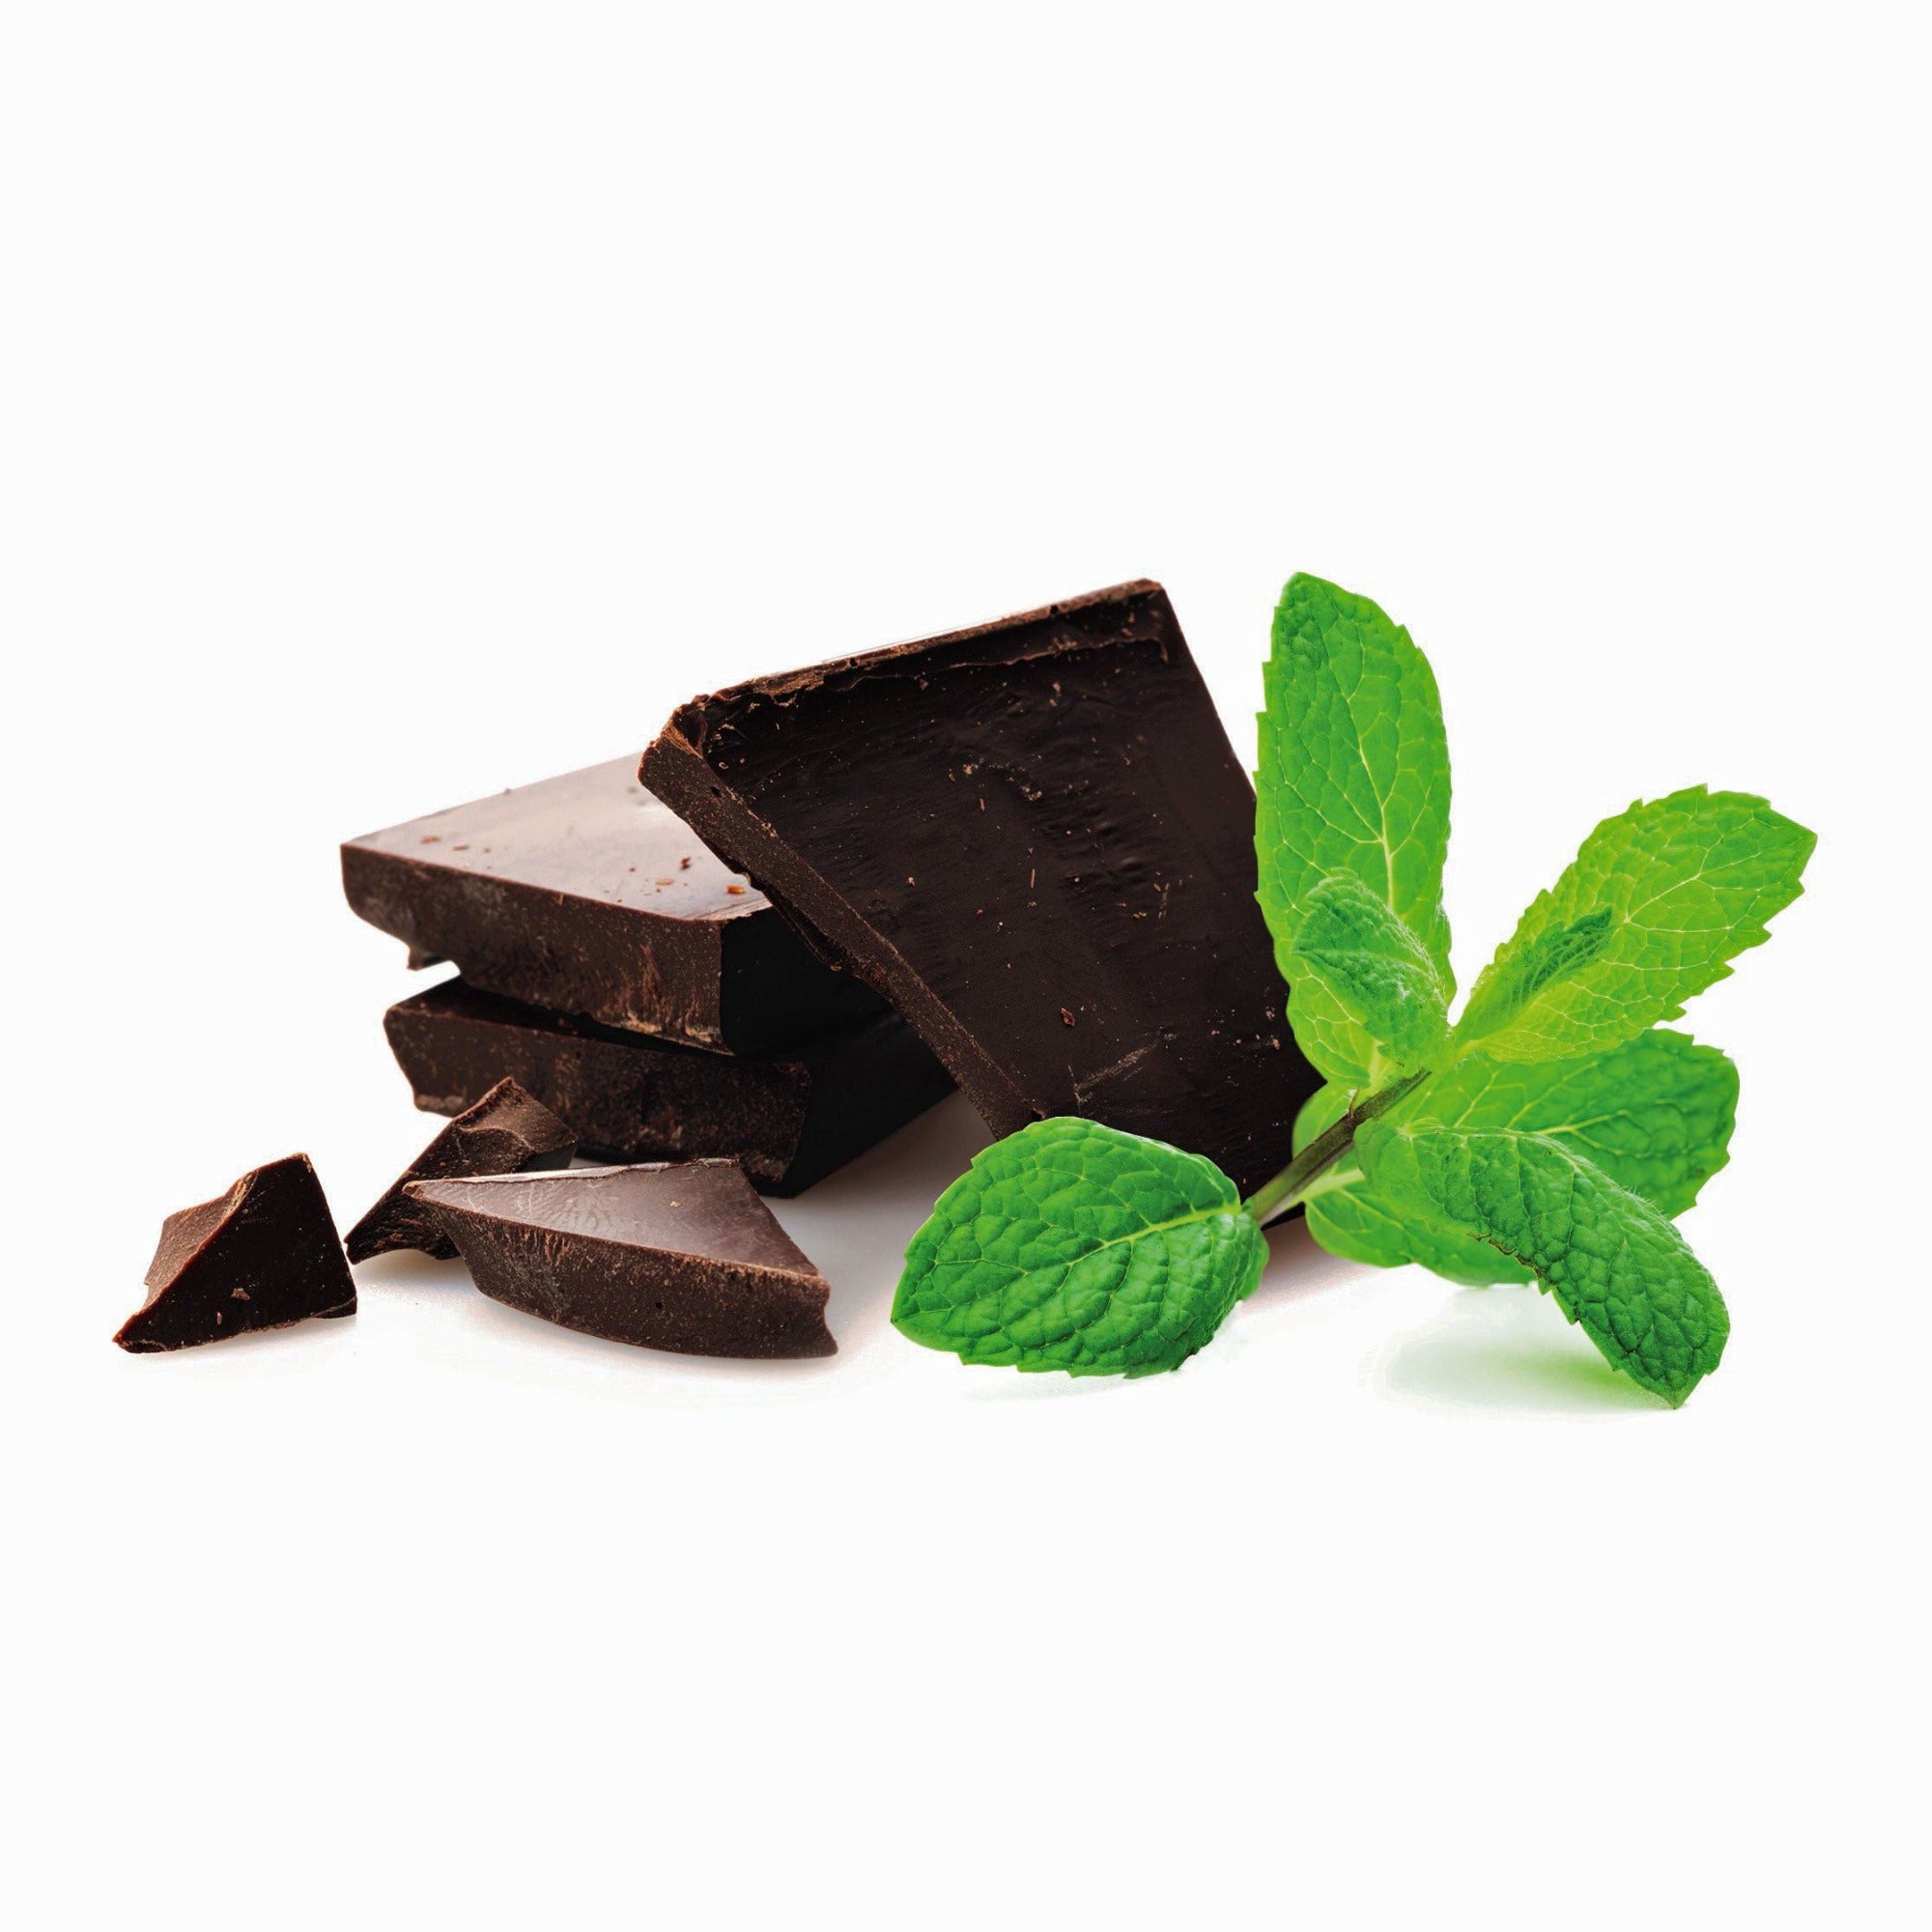 Chocolate Peppermint flavors frontpage